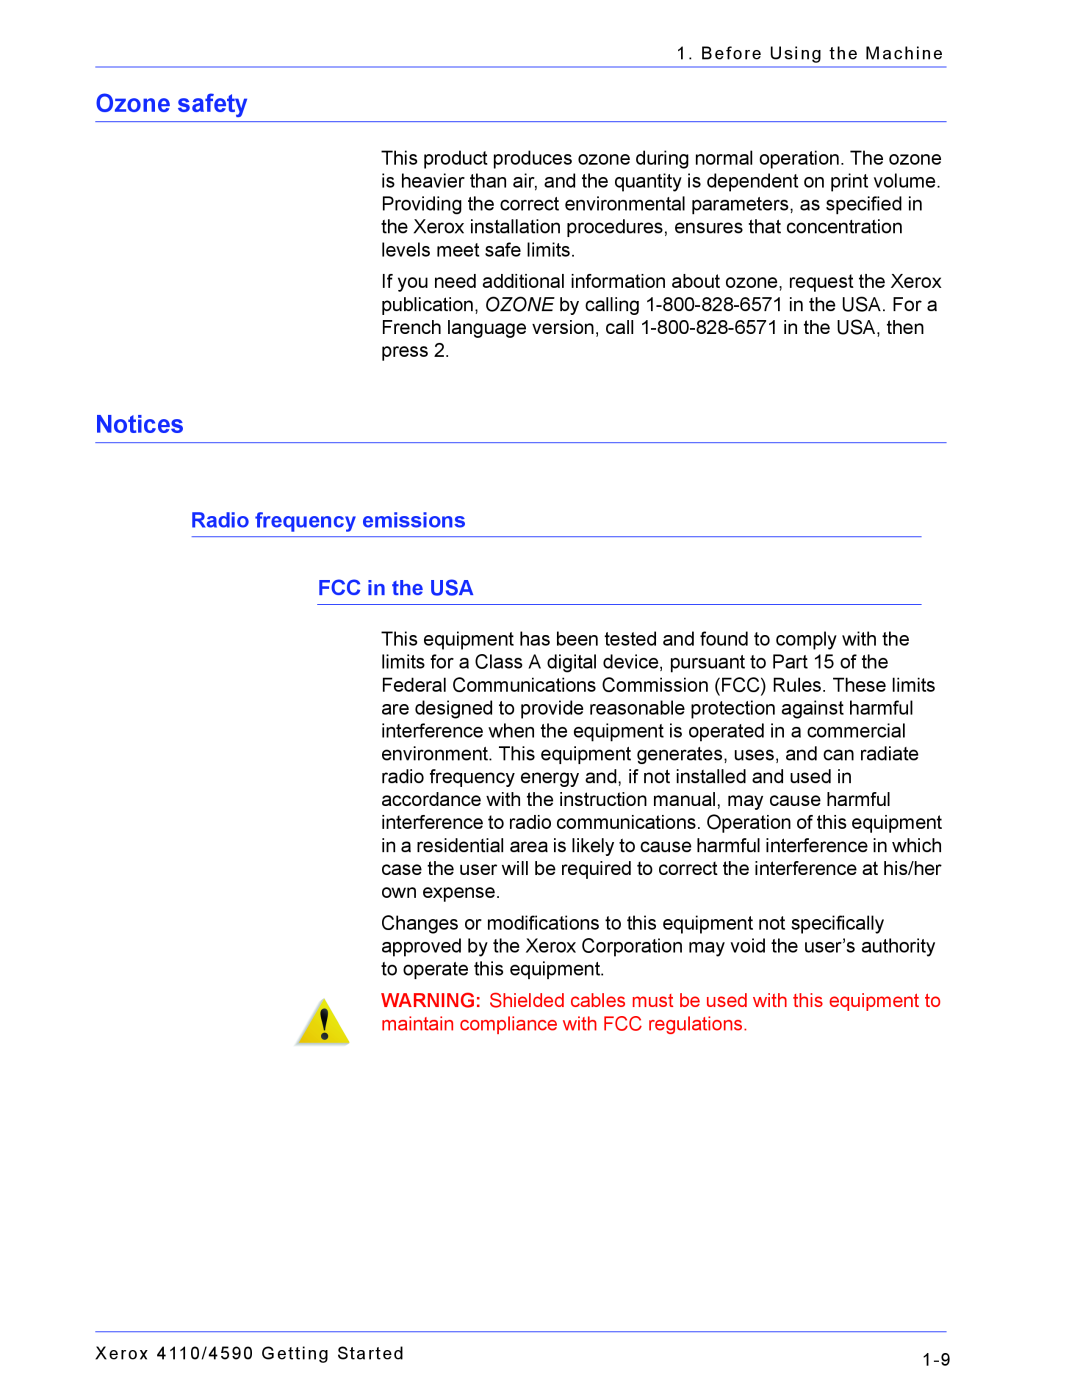 Xerox 4110, 4590 manual Ozone safety, Notices, Radio frequency emissions FCC in the USA 